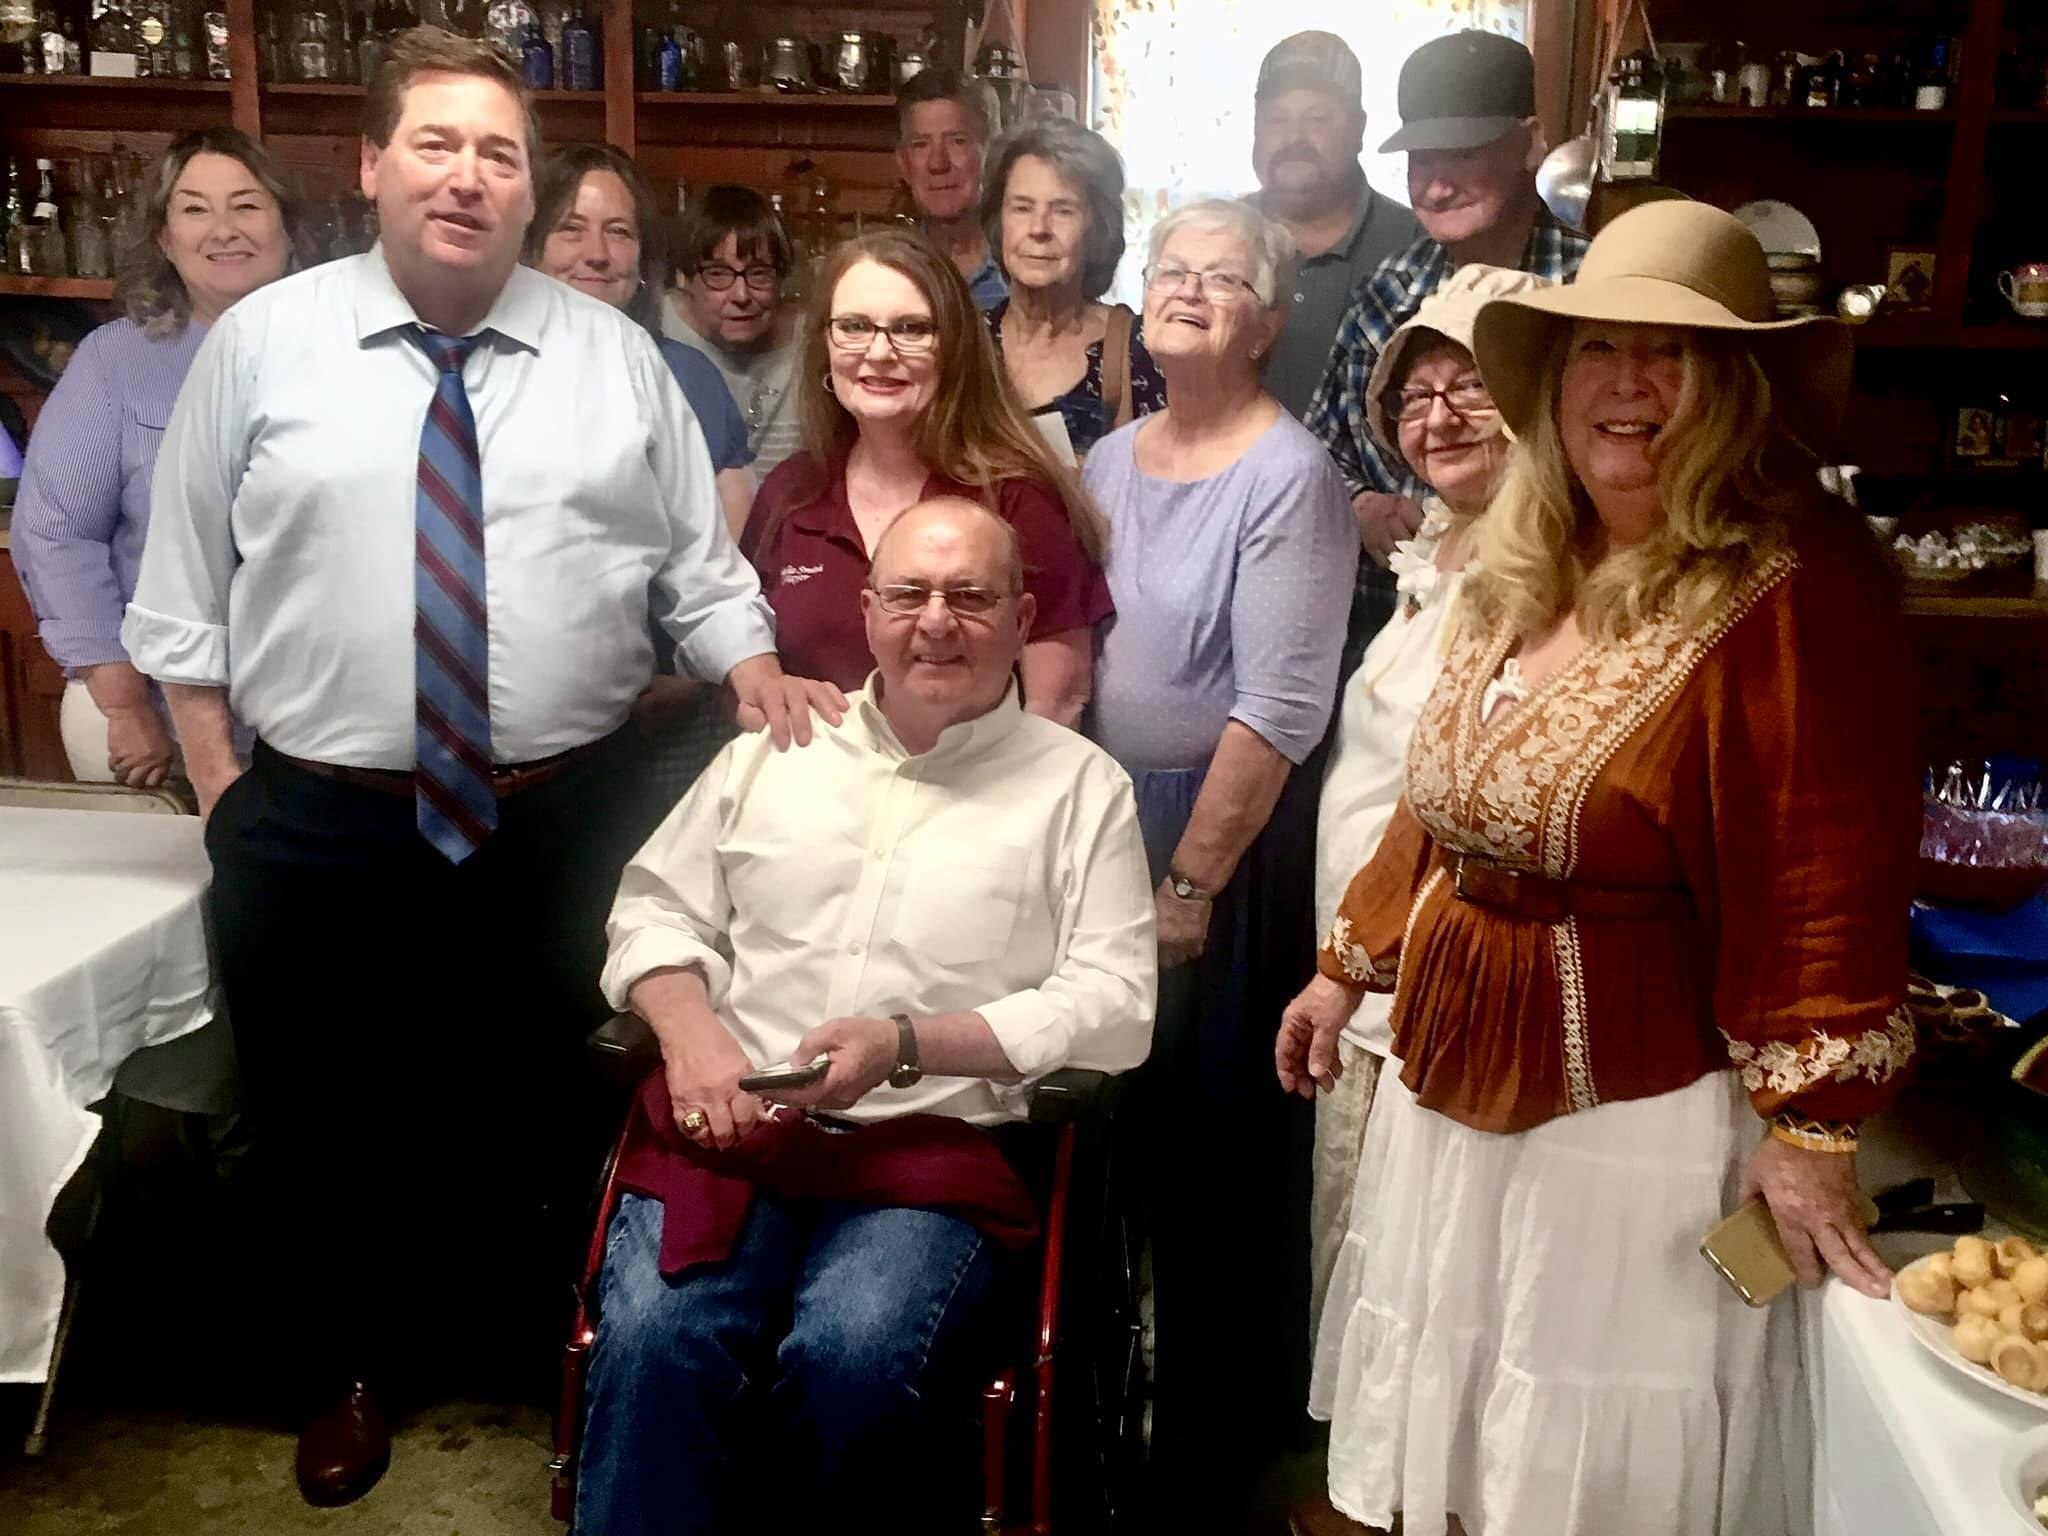 There was a packed house at the Merryville Museum last week, as Lieutenant Governor Billy Nungesser paid Merryville a visit.